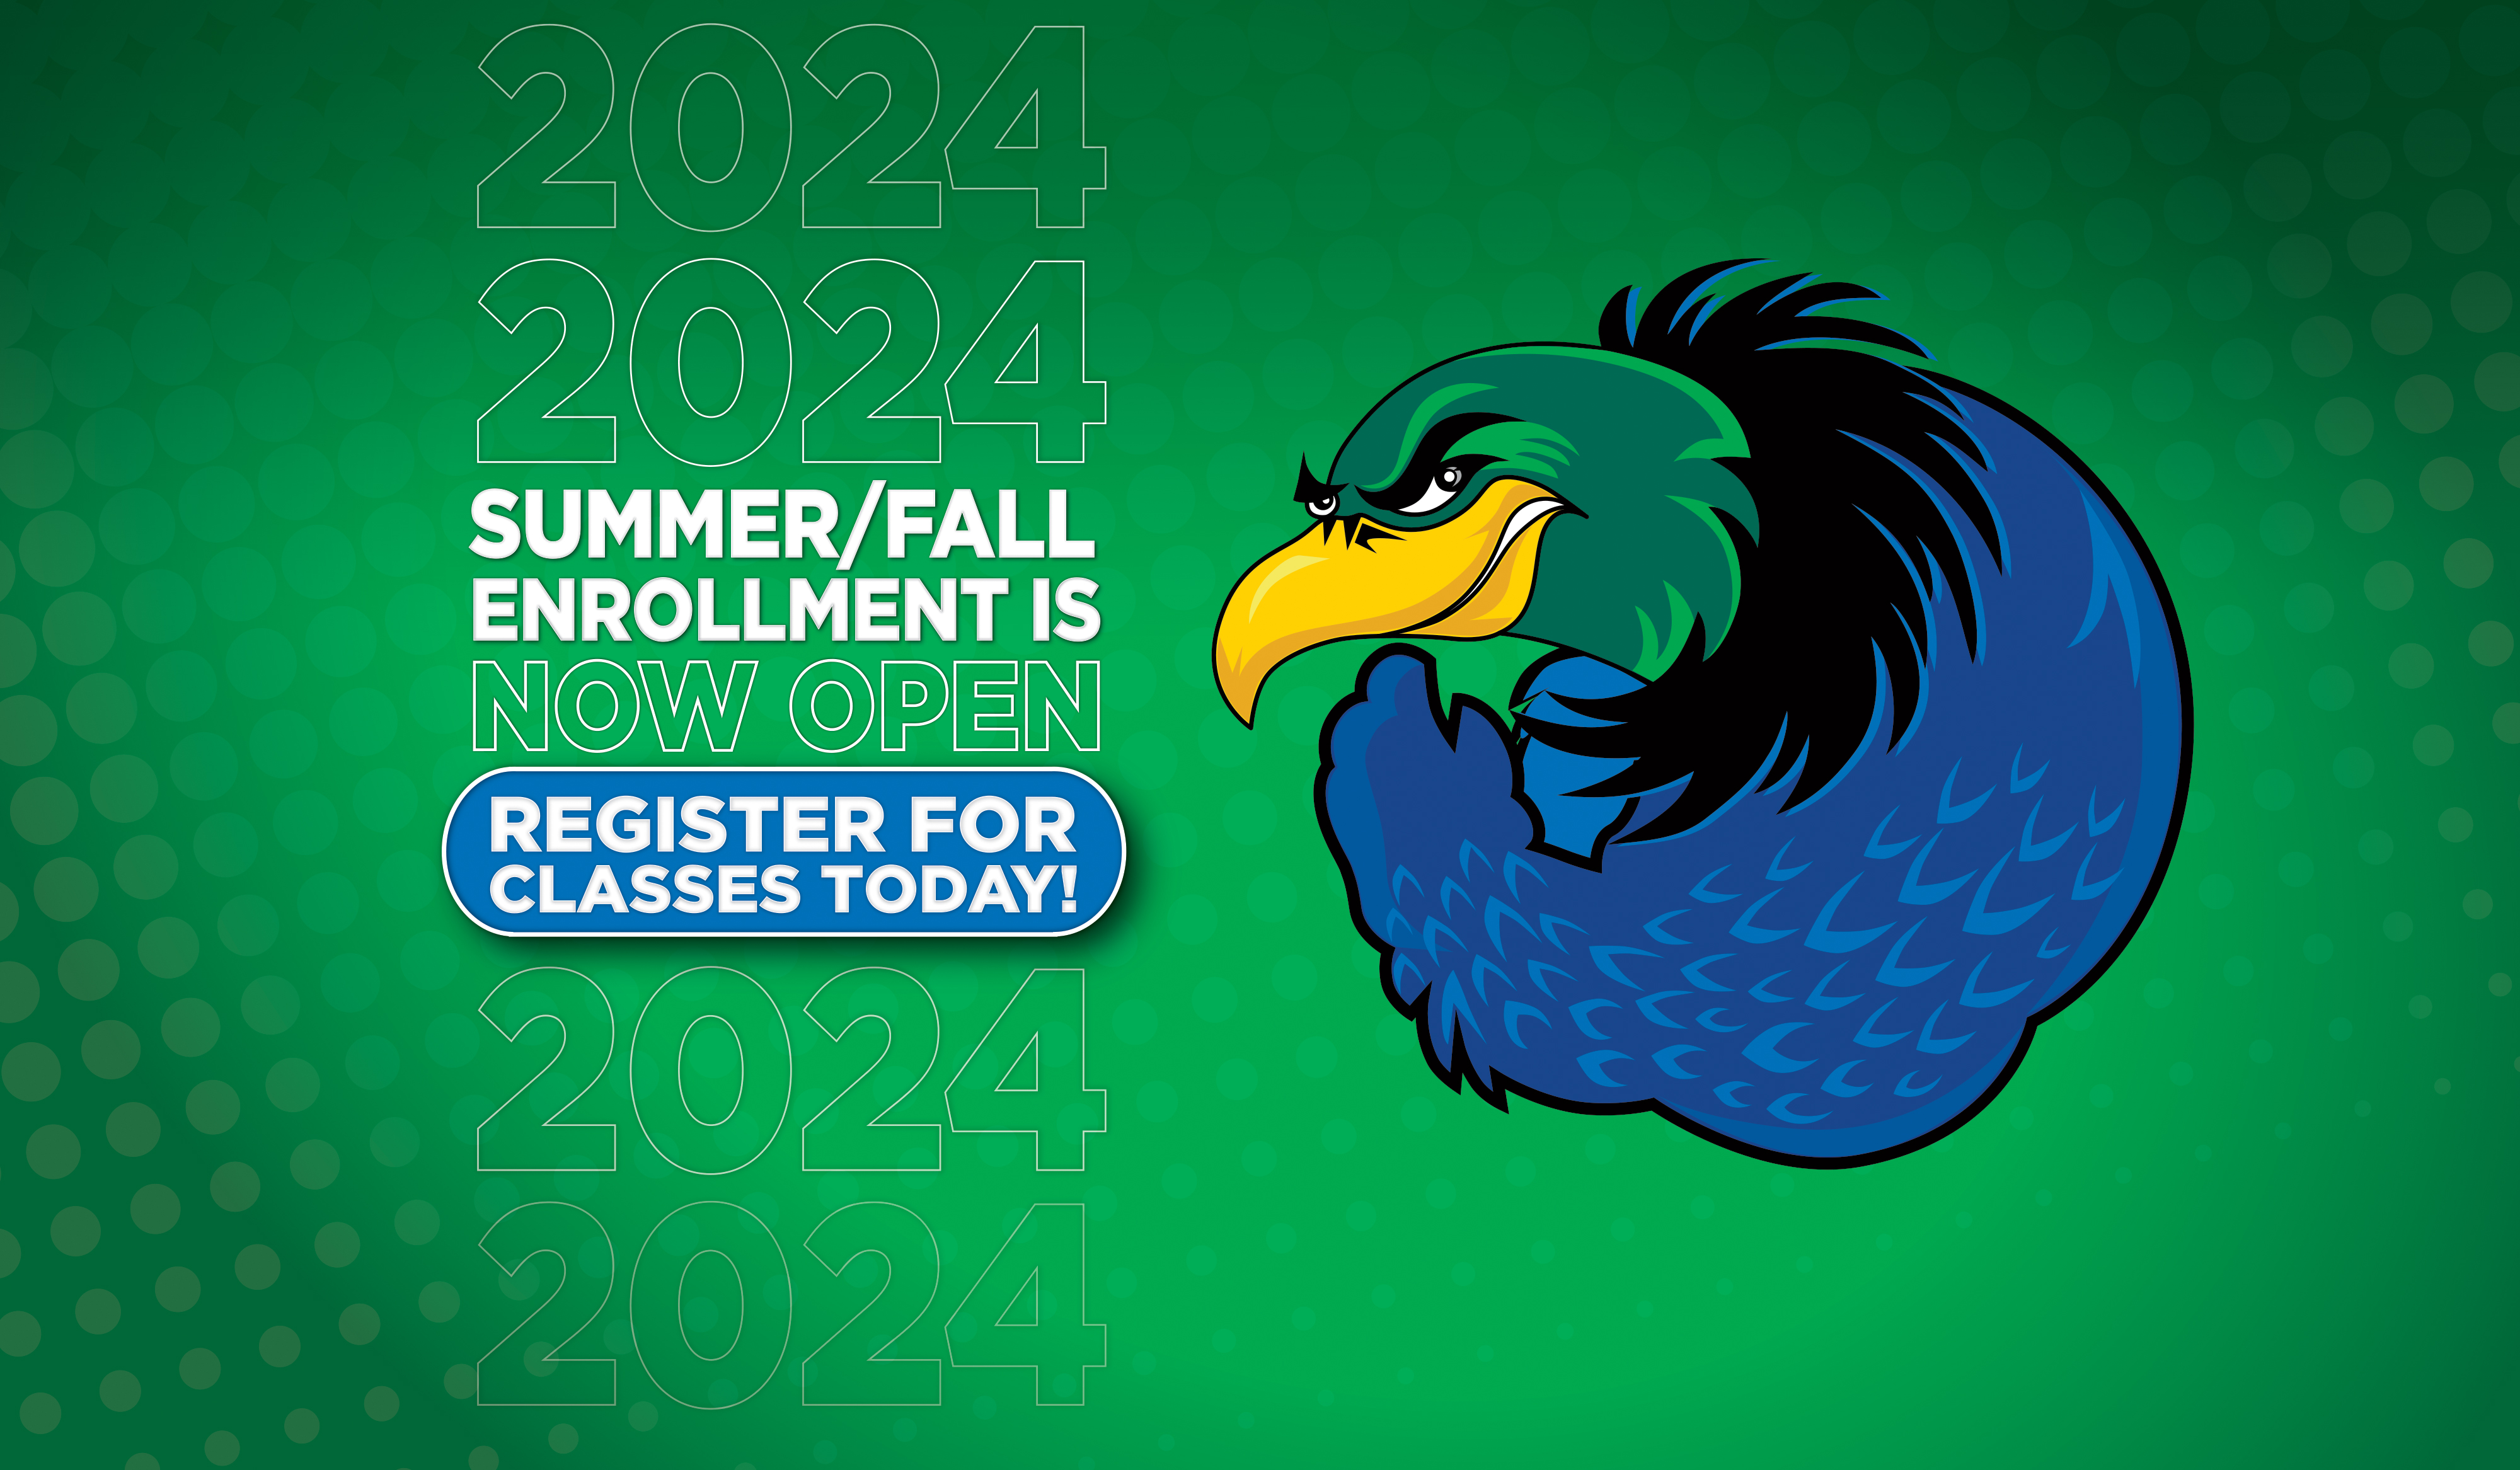 Summer/Fall 2024 Open Enrollment is Now Open. Enroll for classes today!